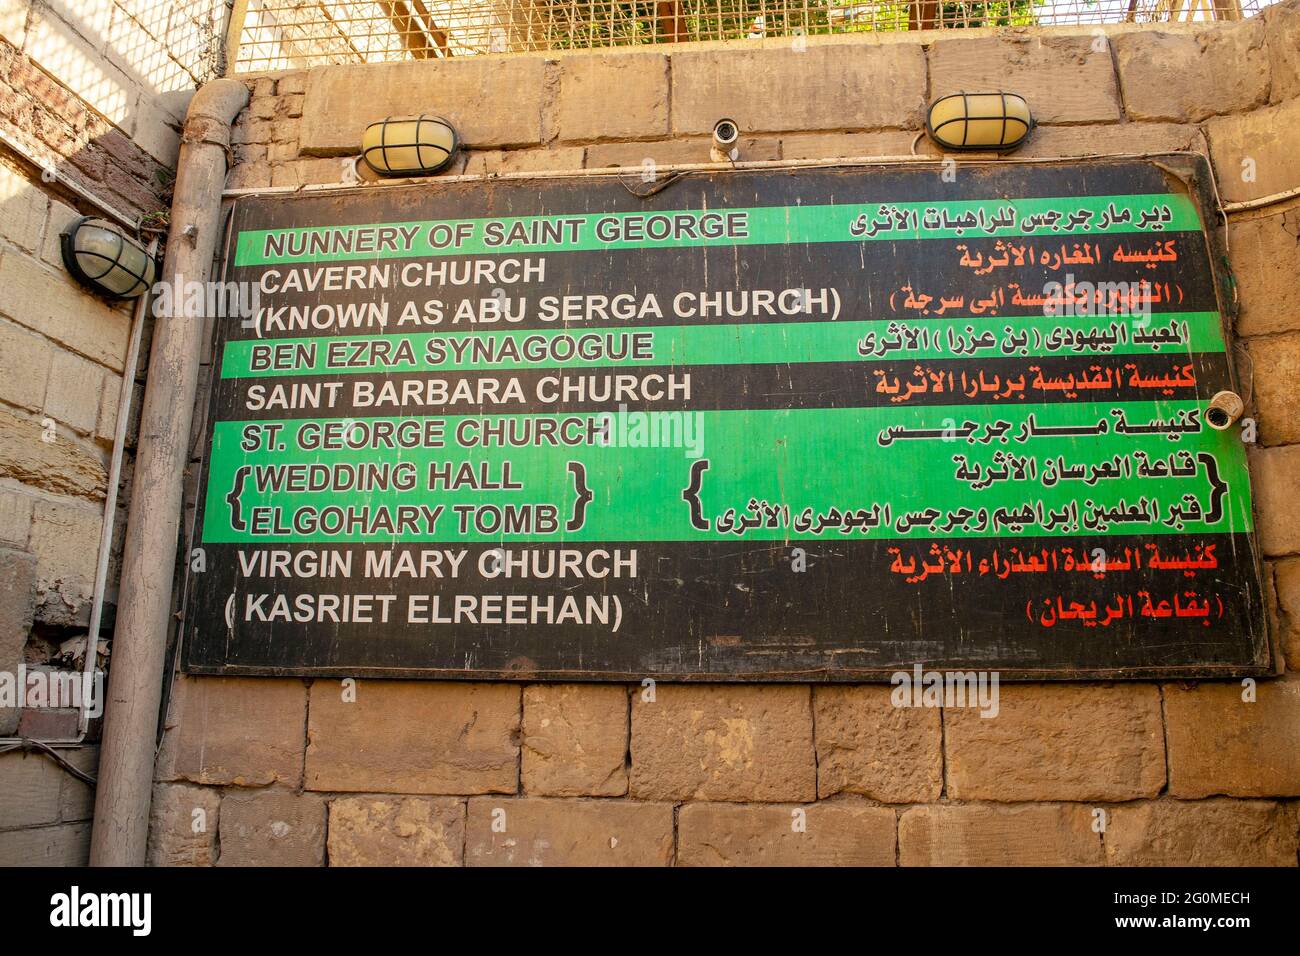 Cairo - Egypt - October 5, 2020: Direction Street sign of Old Churches district in Arab and English languages. Religious attractions street sign. Stock Photo